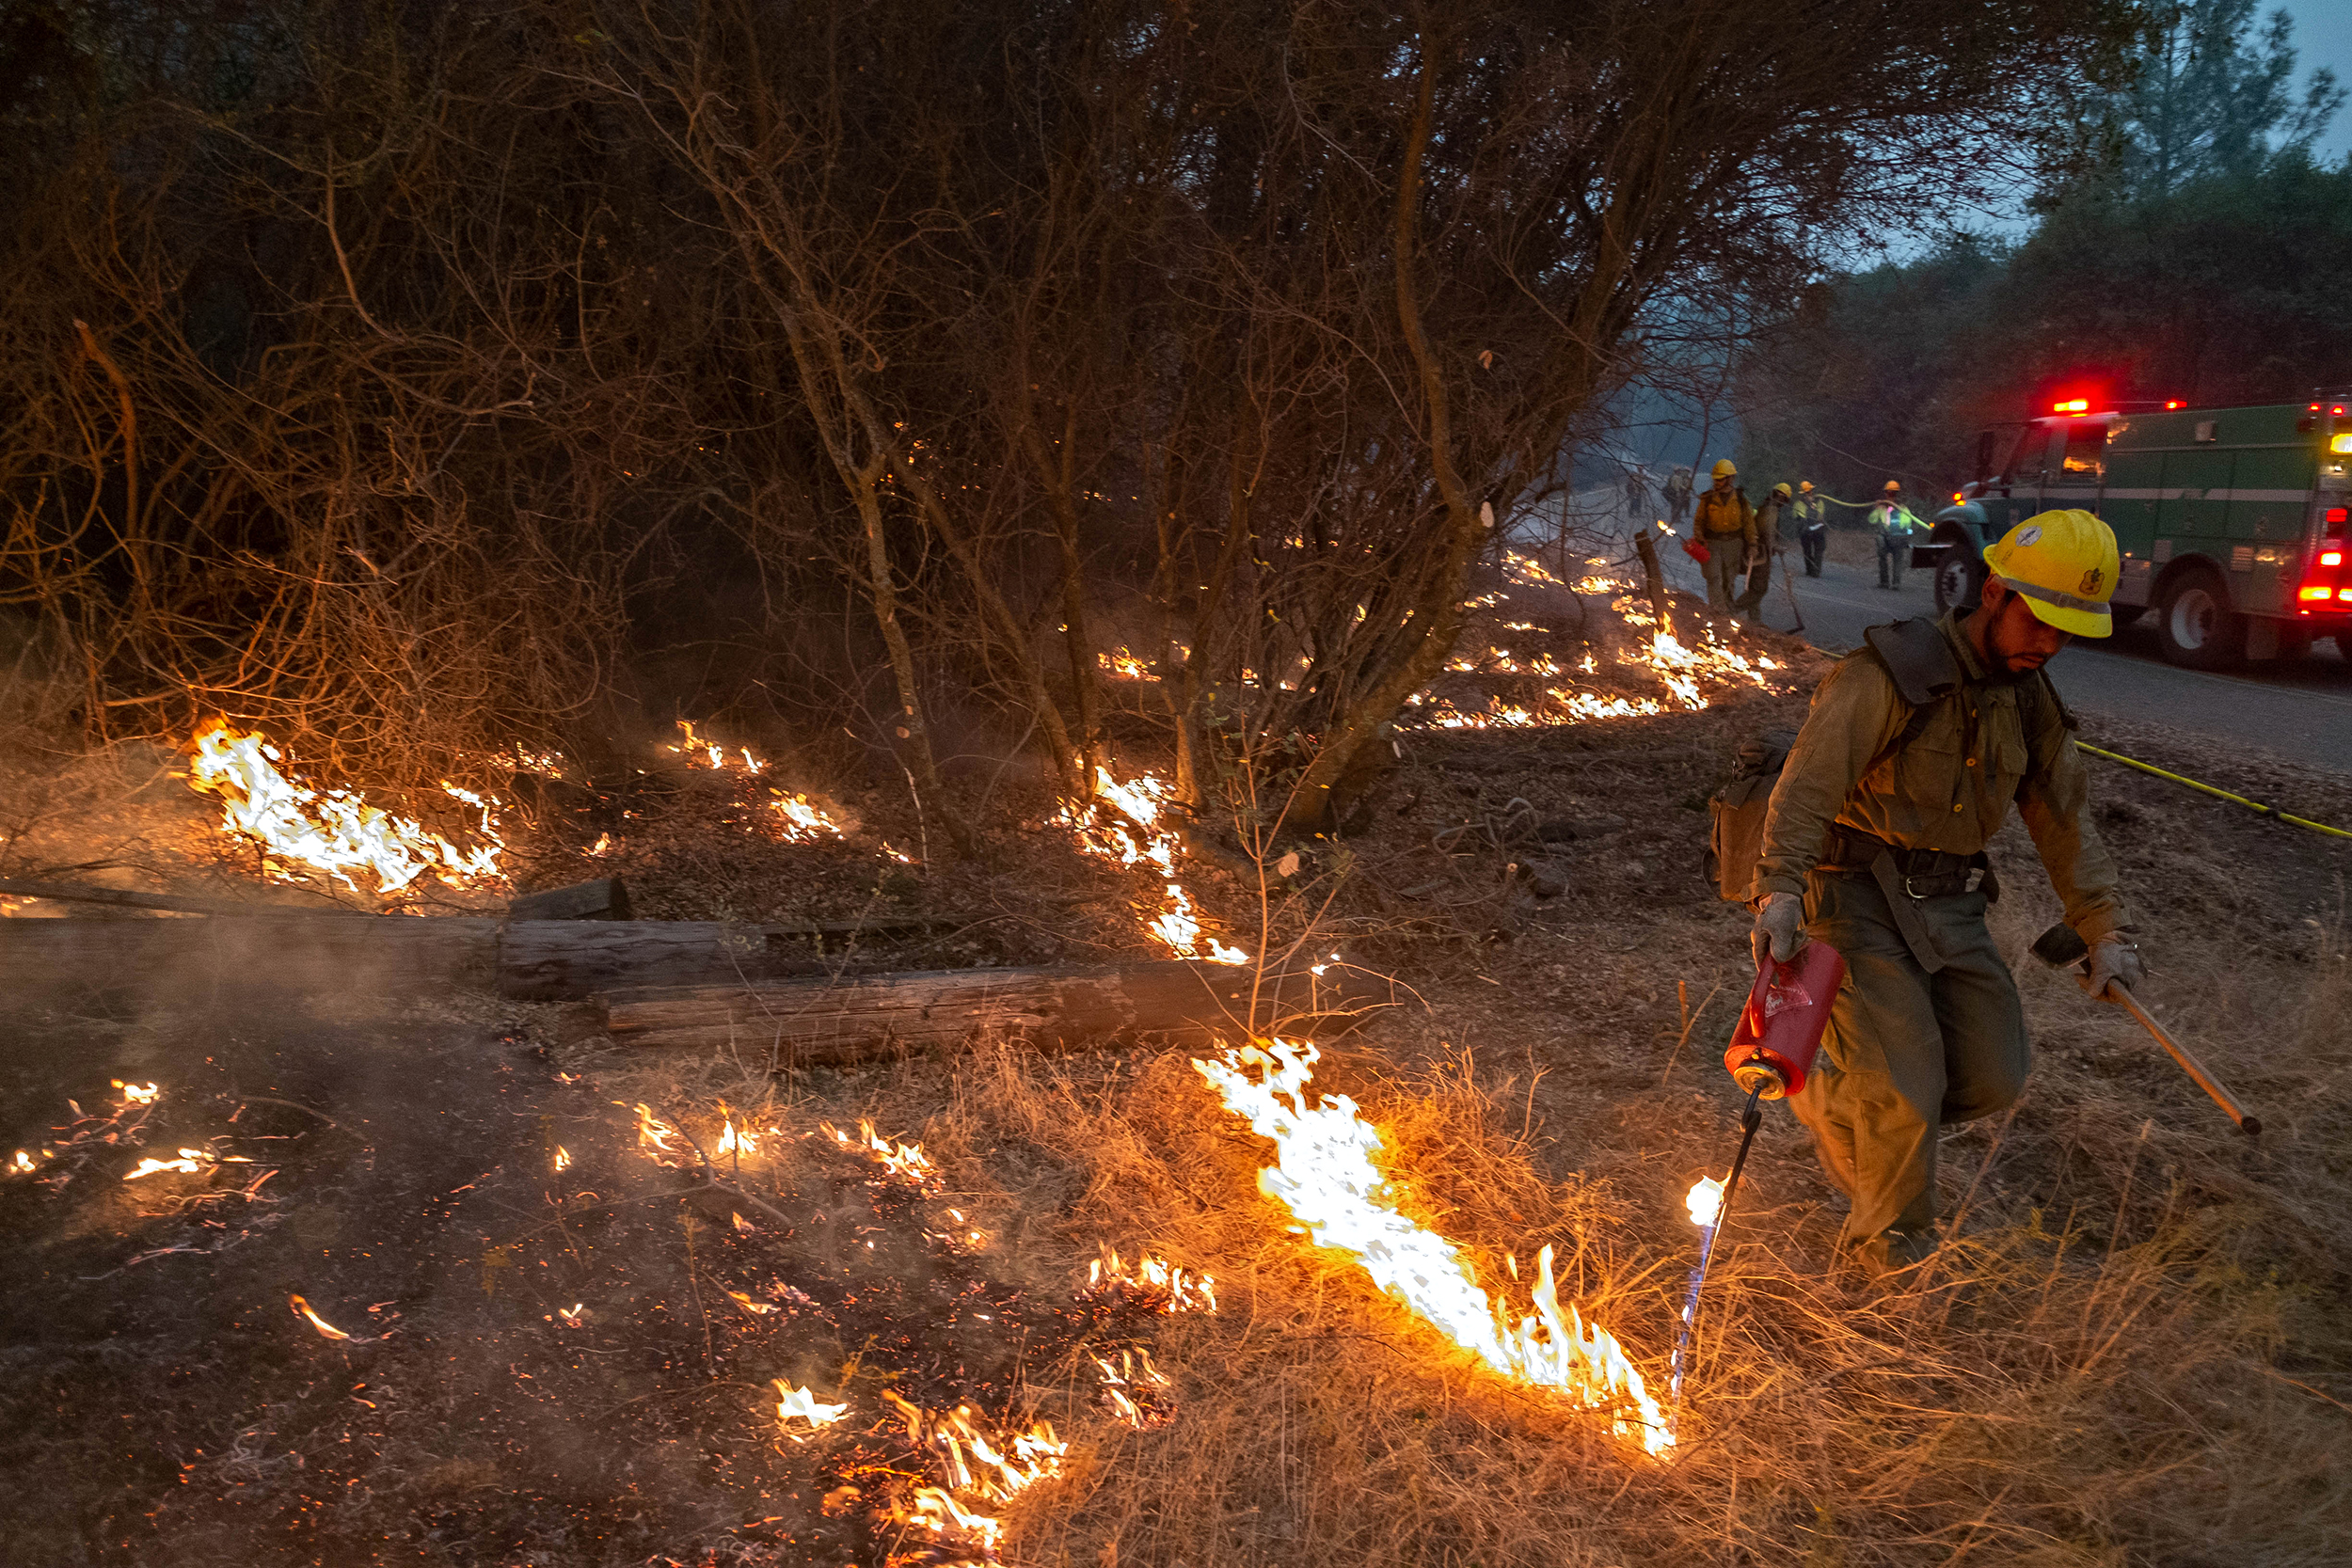 The Springville Hotshots brought fire down a dozer line and tied into Road 81 just north of the Mammoth Pools Trailer Park in the evening of September 10, 2020 as efforts continue to contain the Creek Fire on the Sierra National Forest.